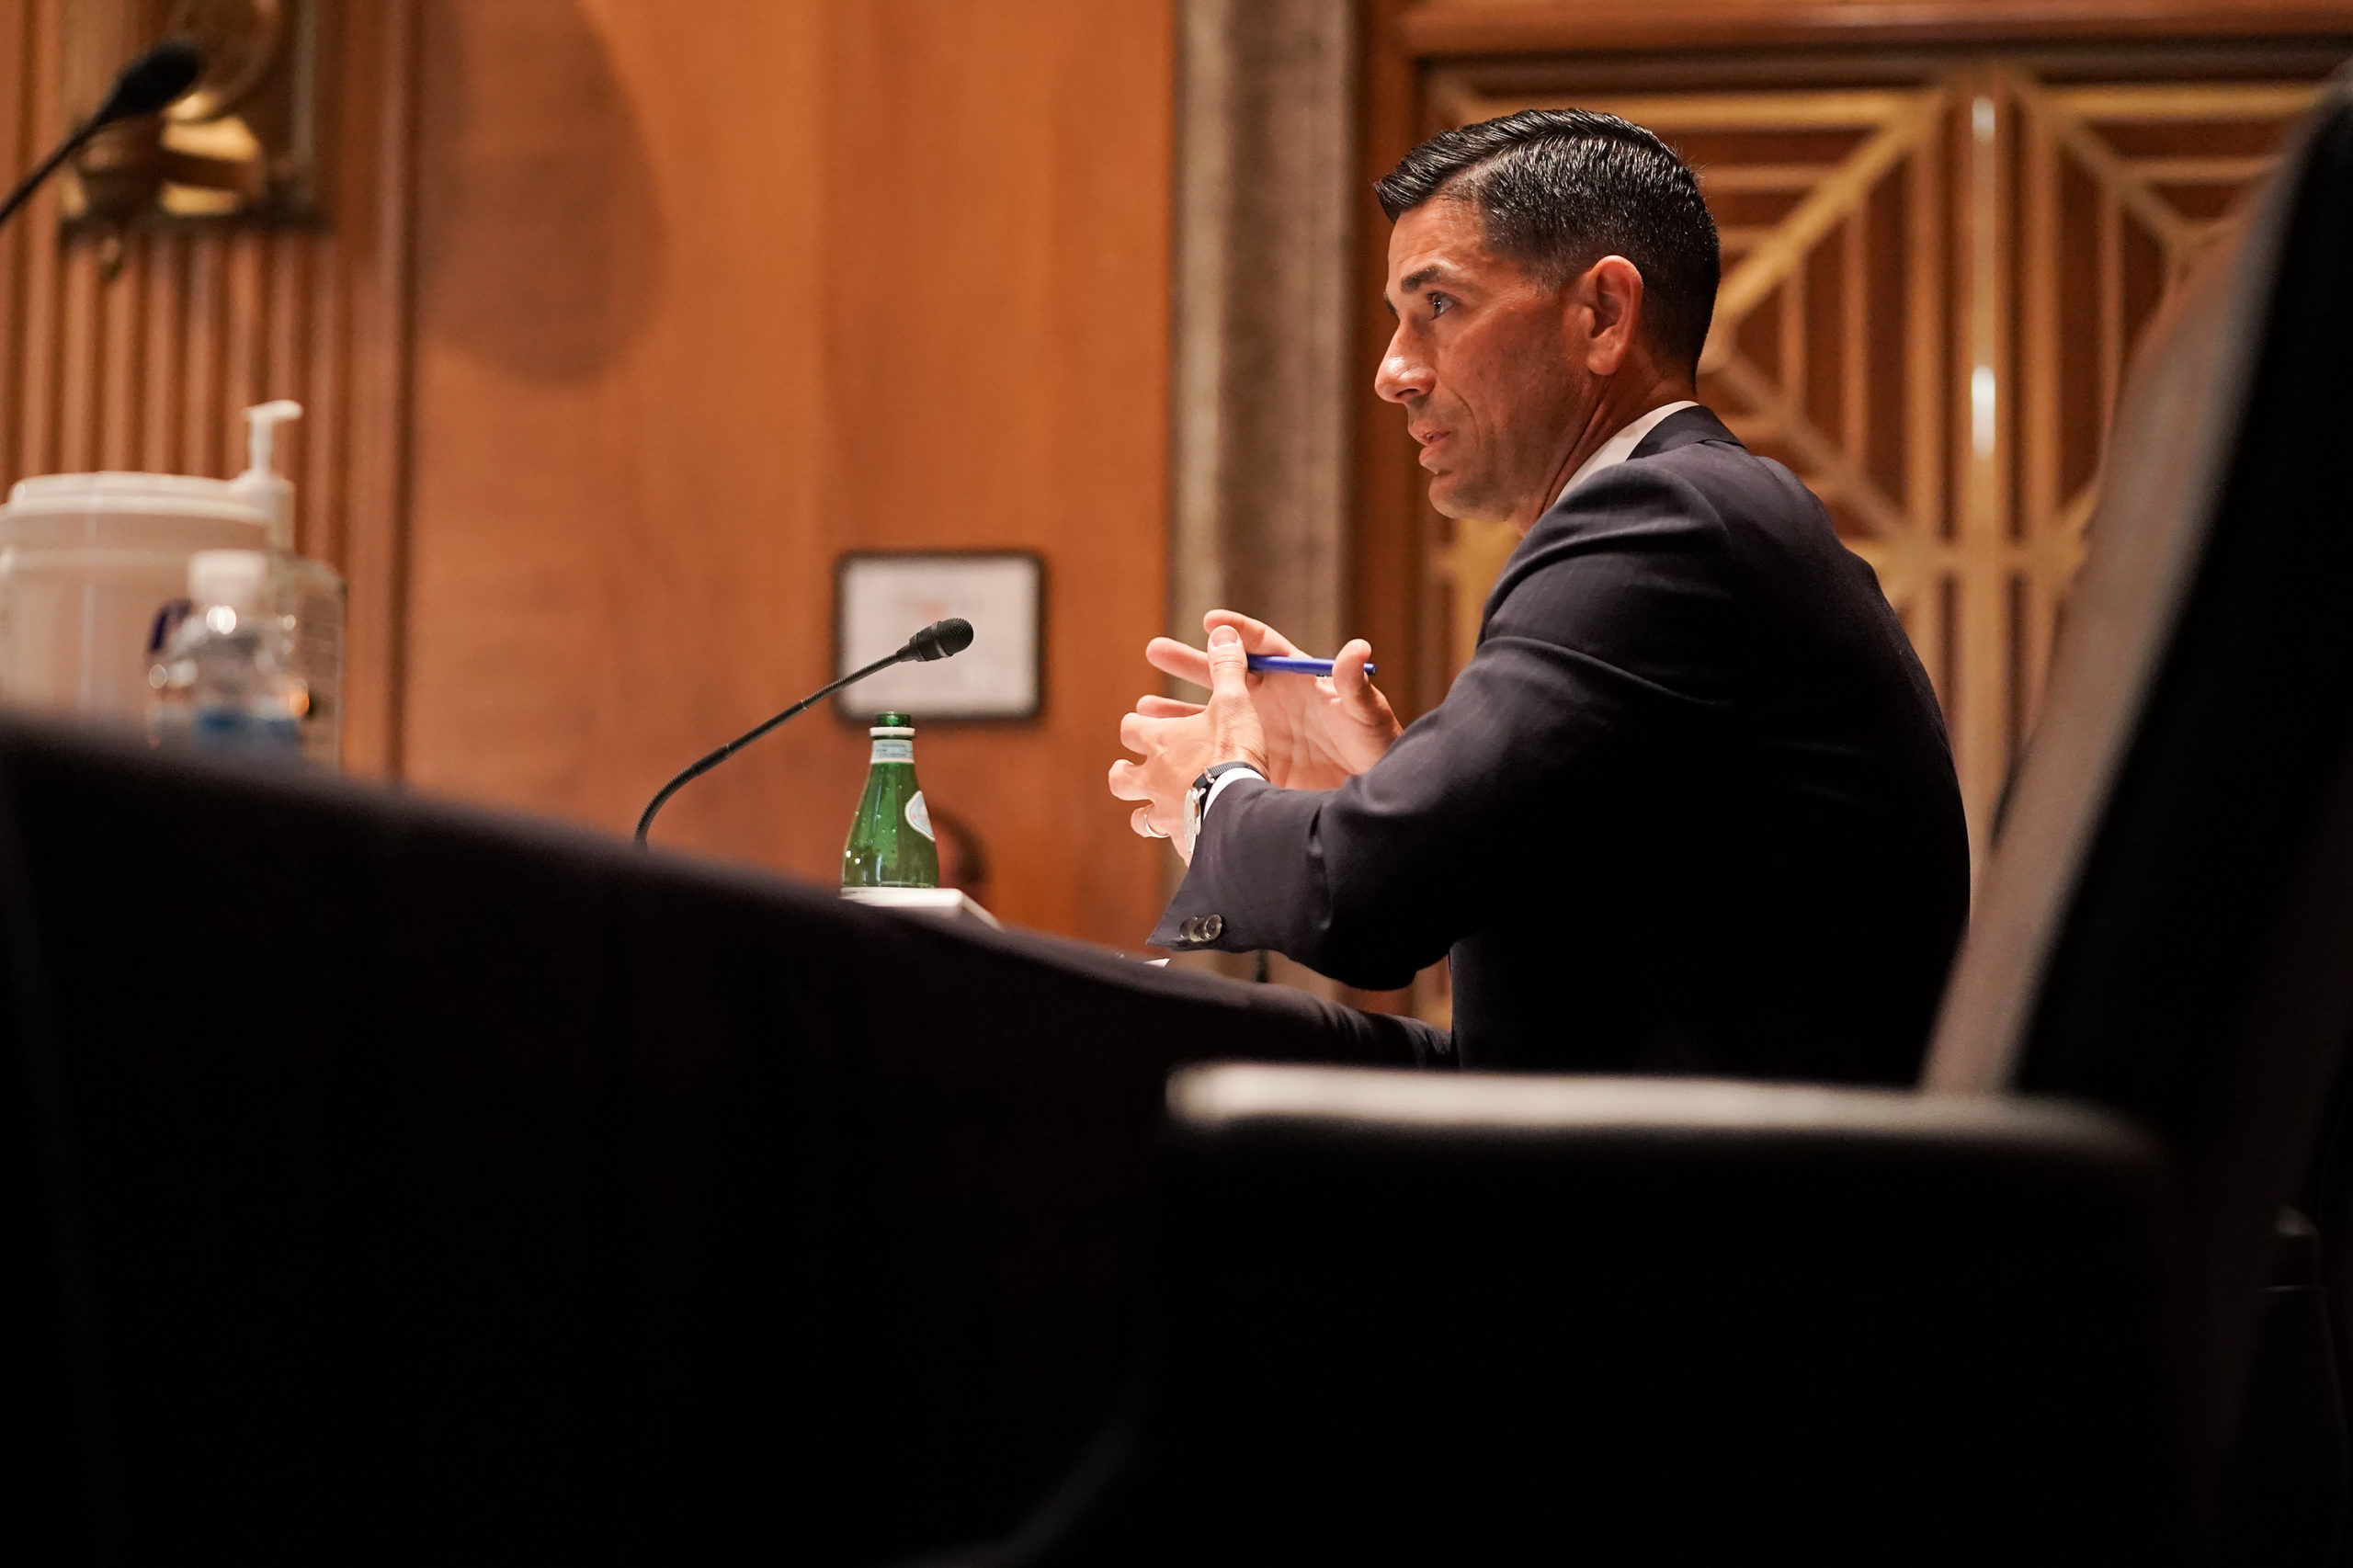 Acting Secretary of Homeland Security Chad Wolf testifies at his Senate Homeland Security and Governmental Affairs Committee confirmation hearing on September 23, 2020 in Washington, D.C. (Greg Nash/Pool/AFP via Getty Images)